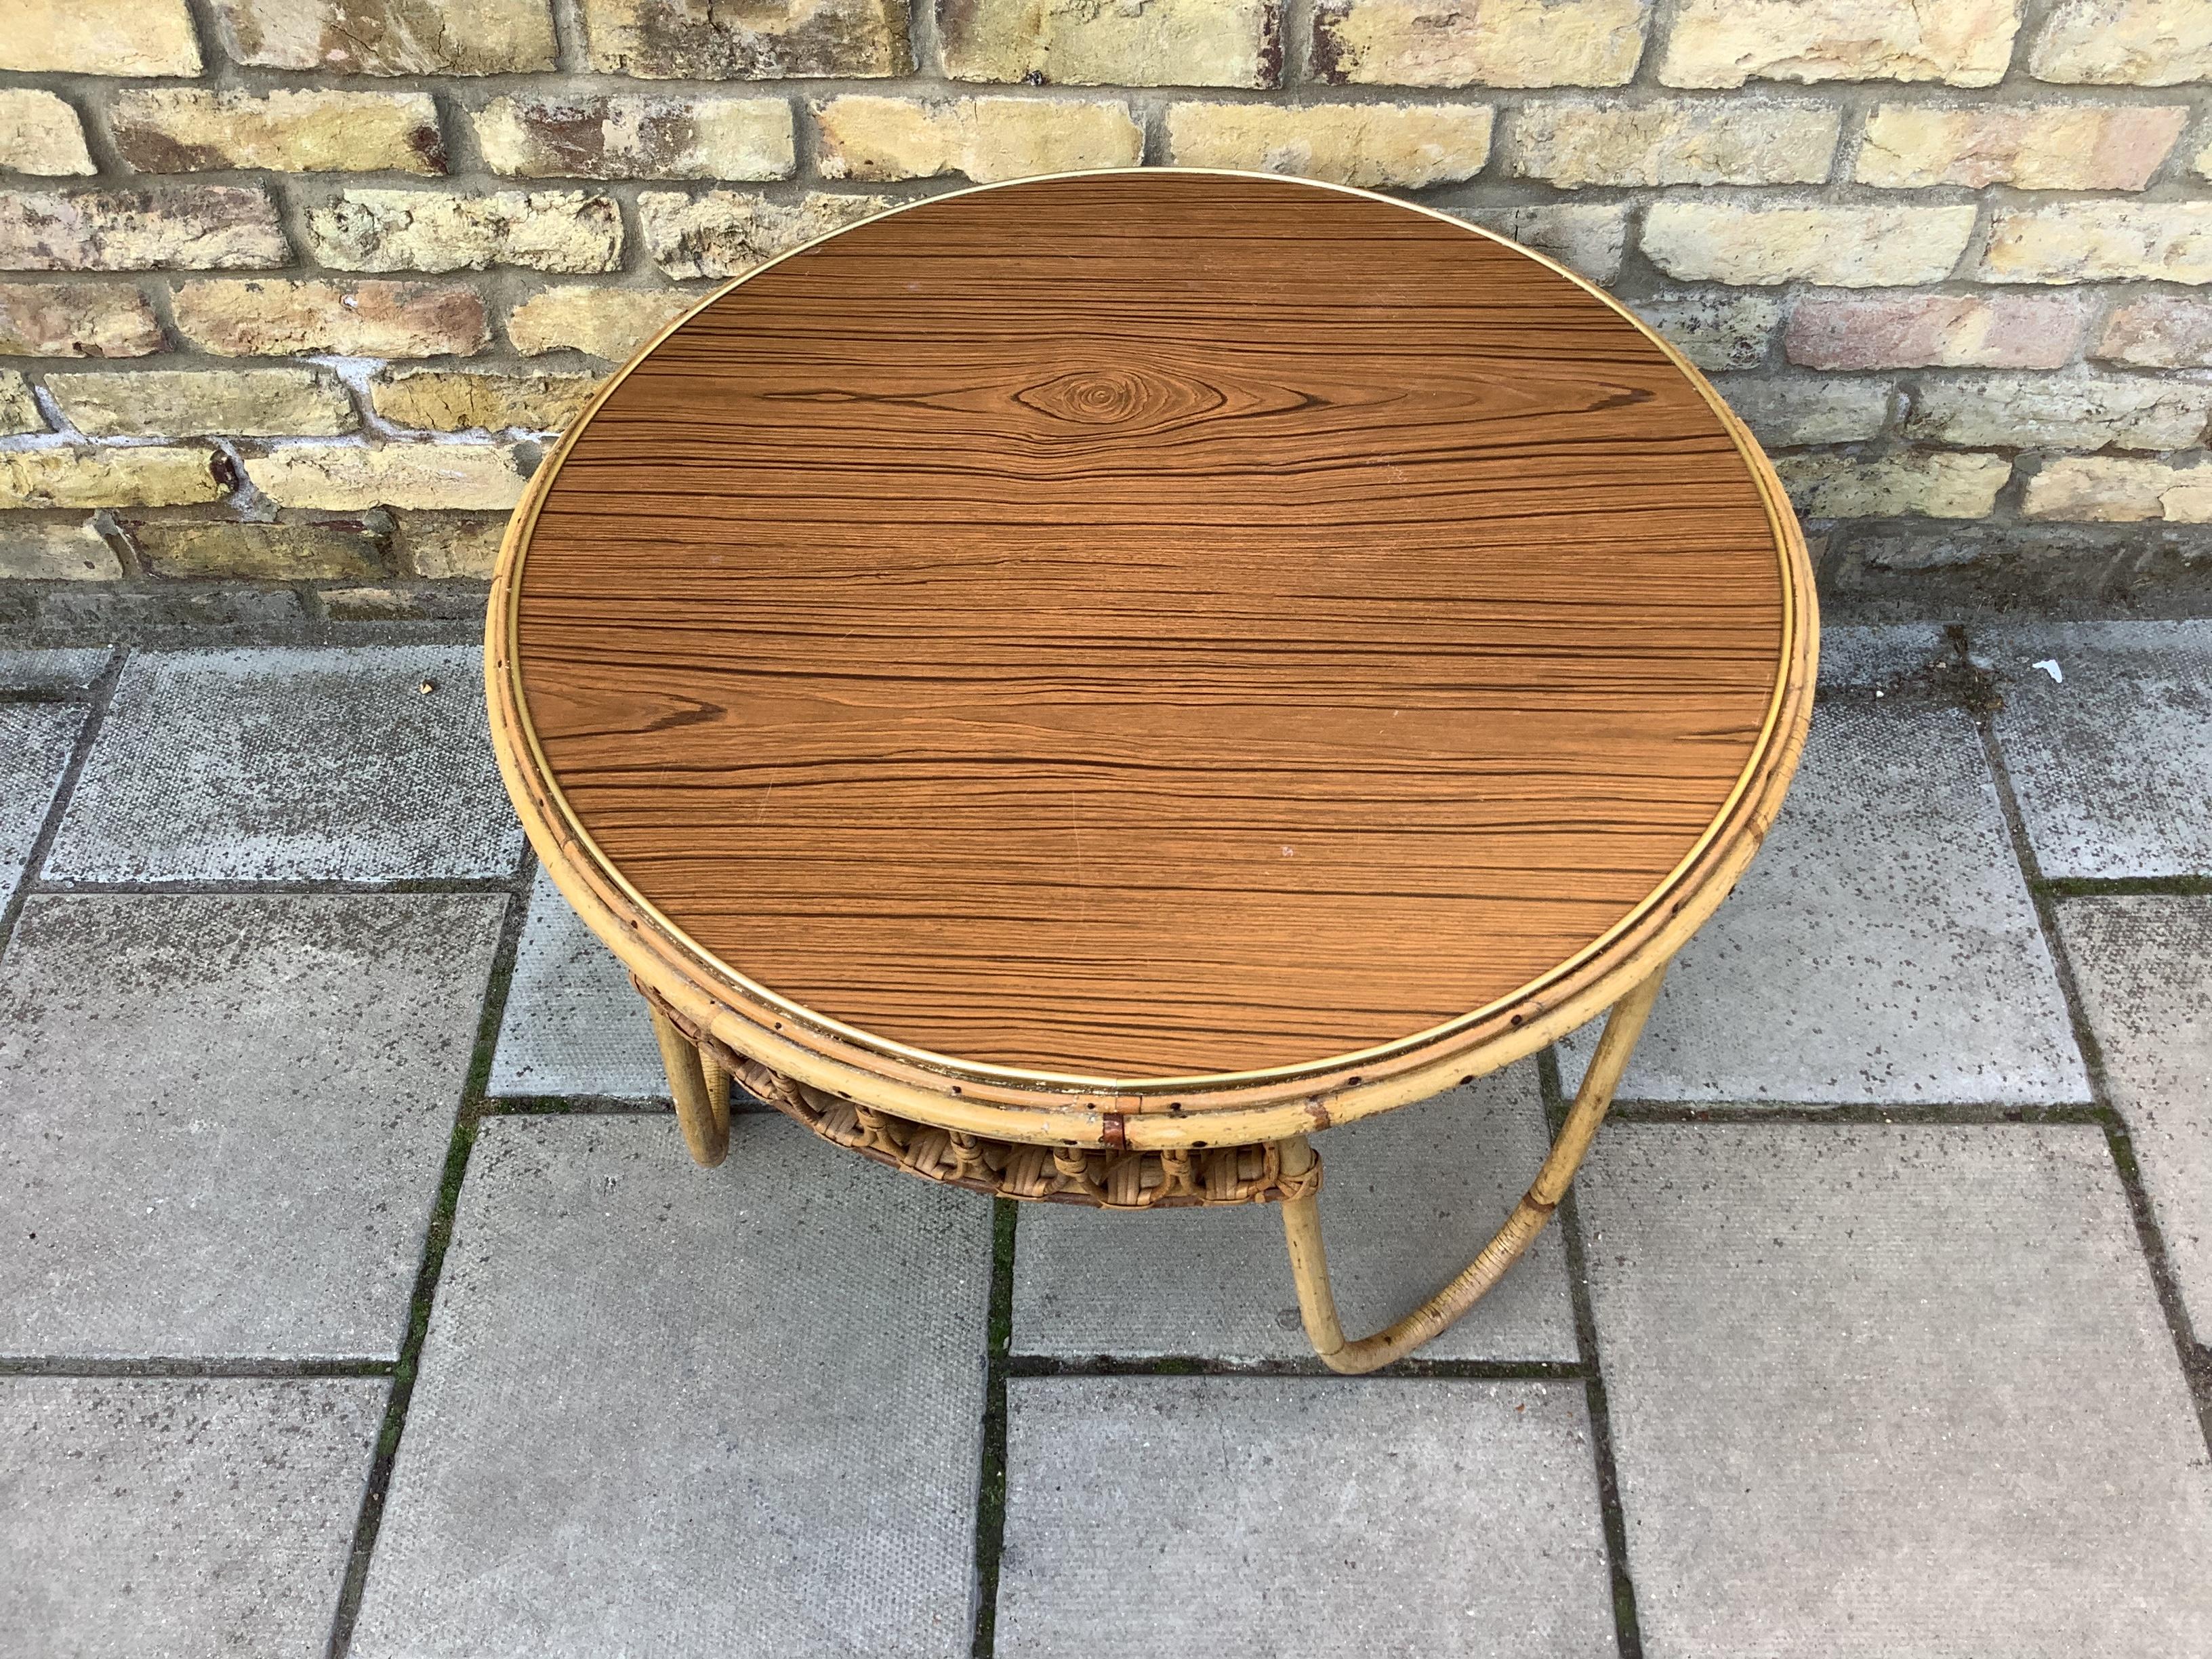 Round coffee table in bamboo with curved legs and a wooden top brass boarder
1950’s French.